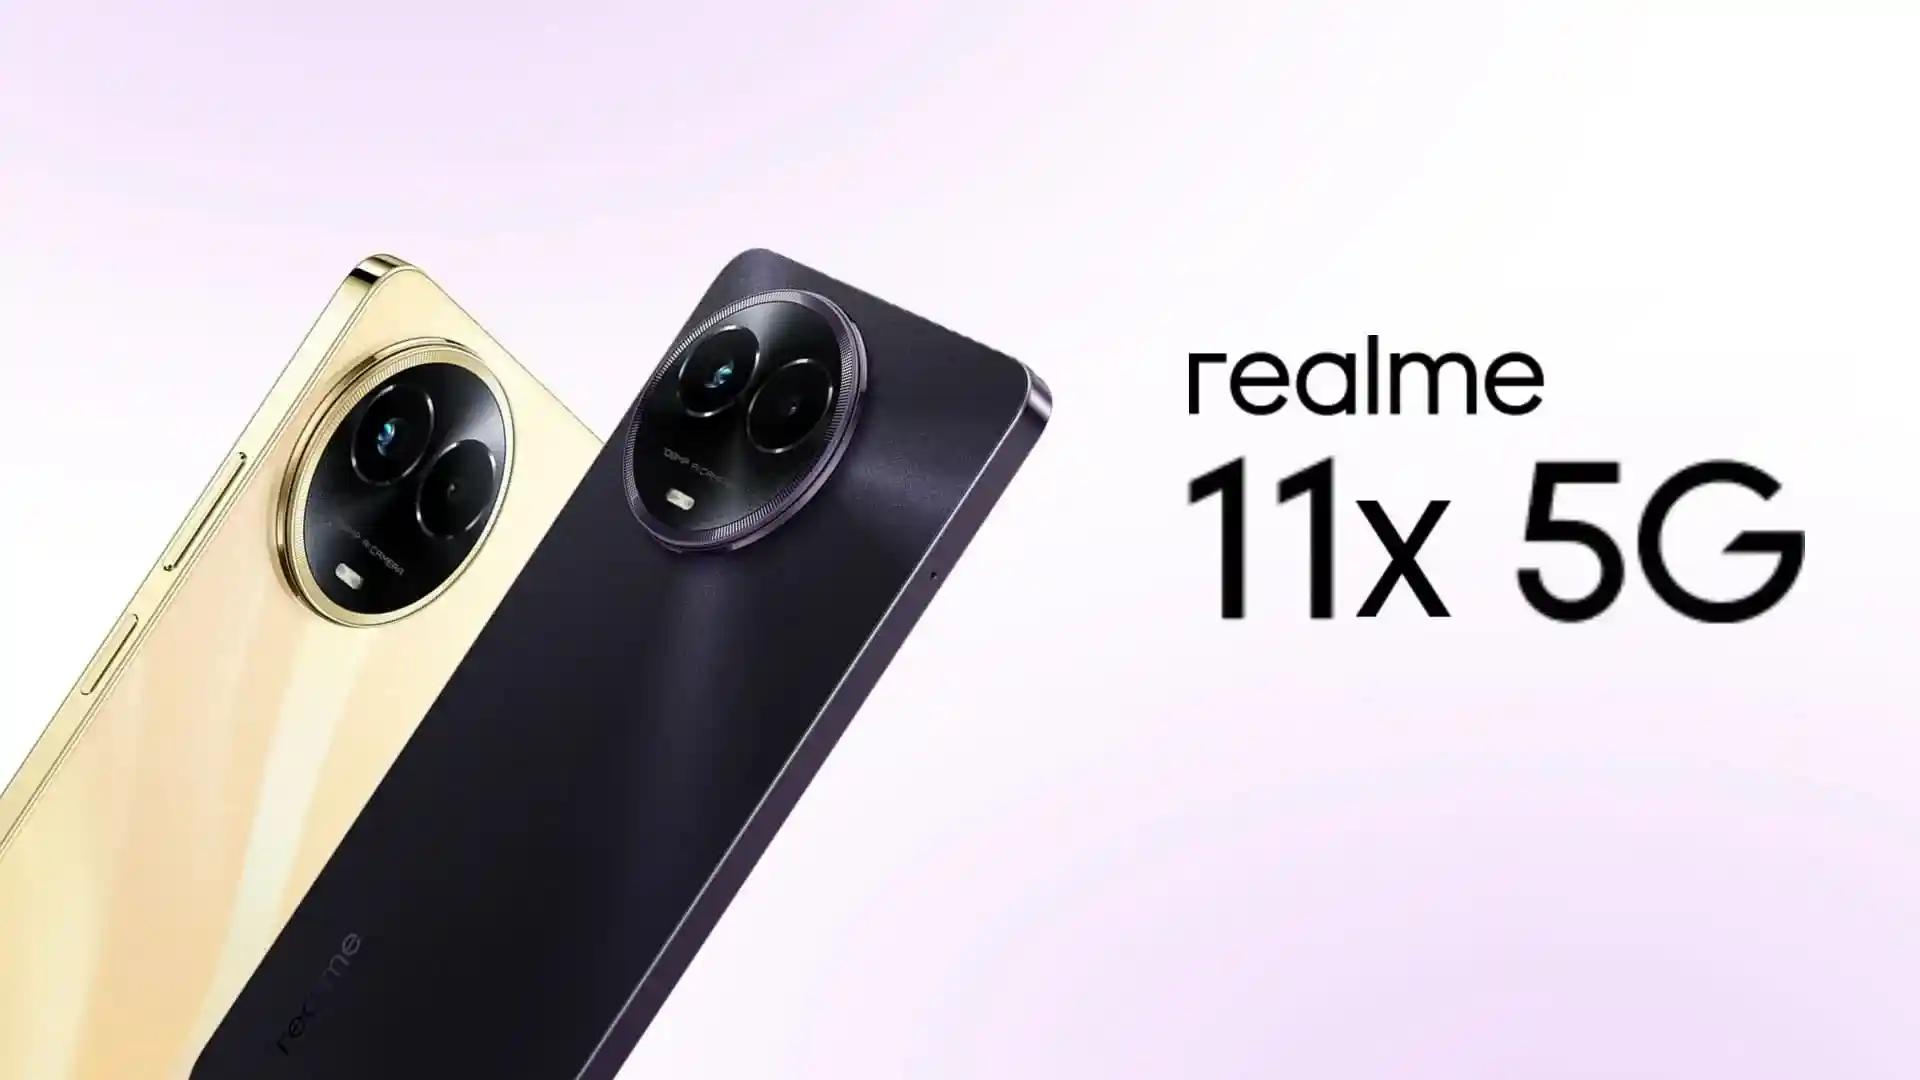 Positioning in the Realme Line-up